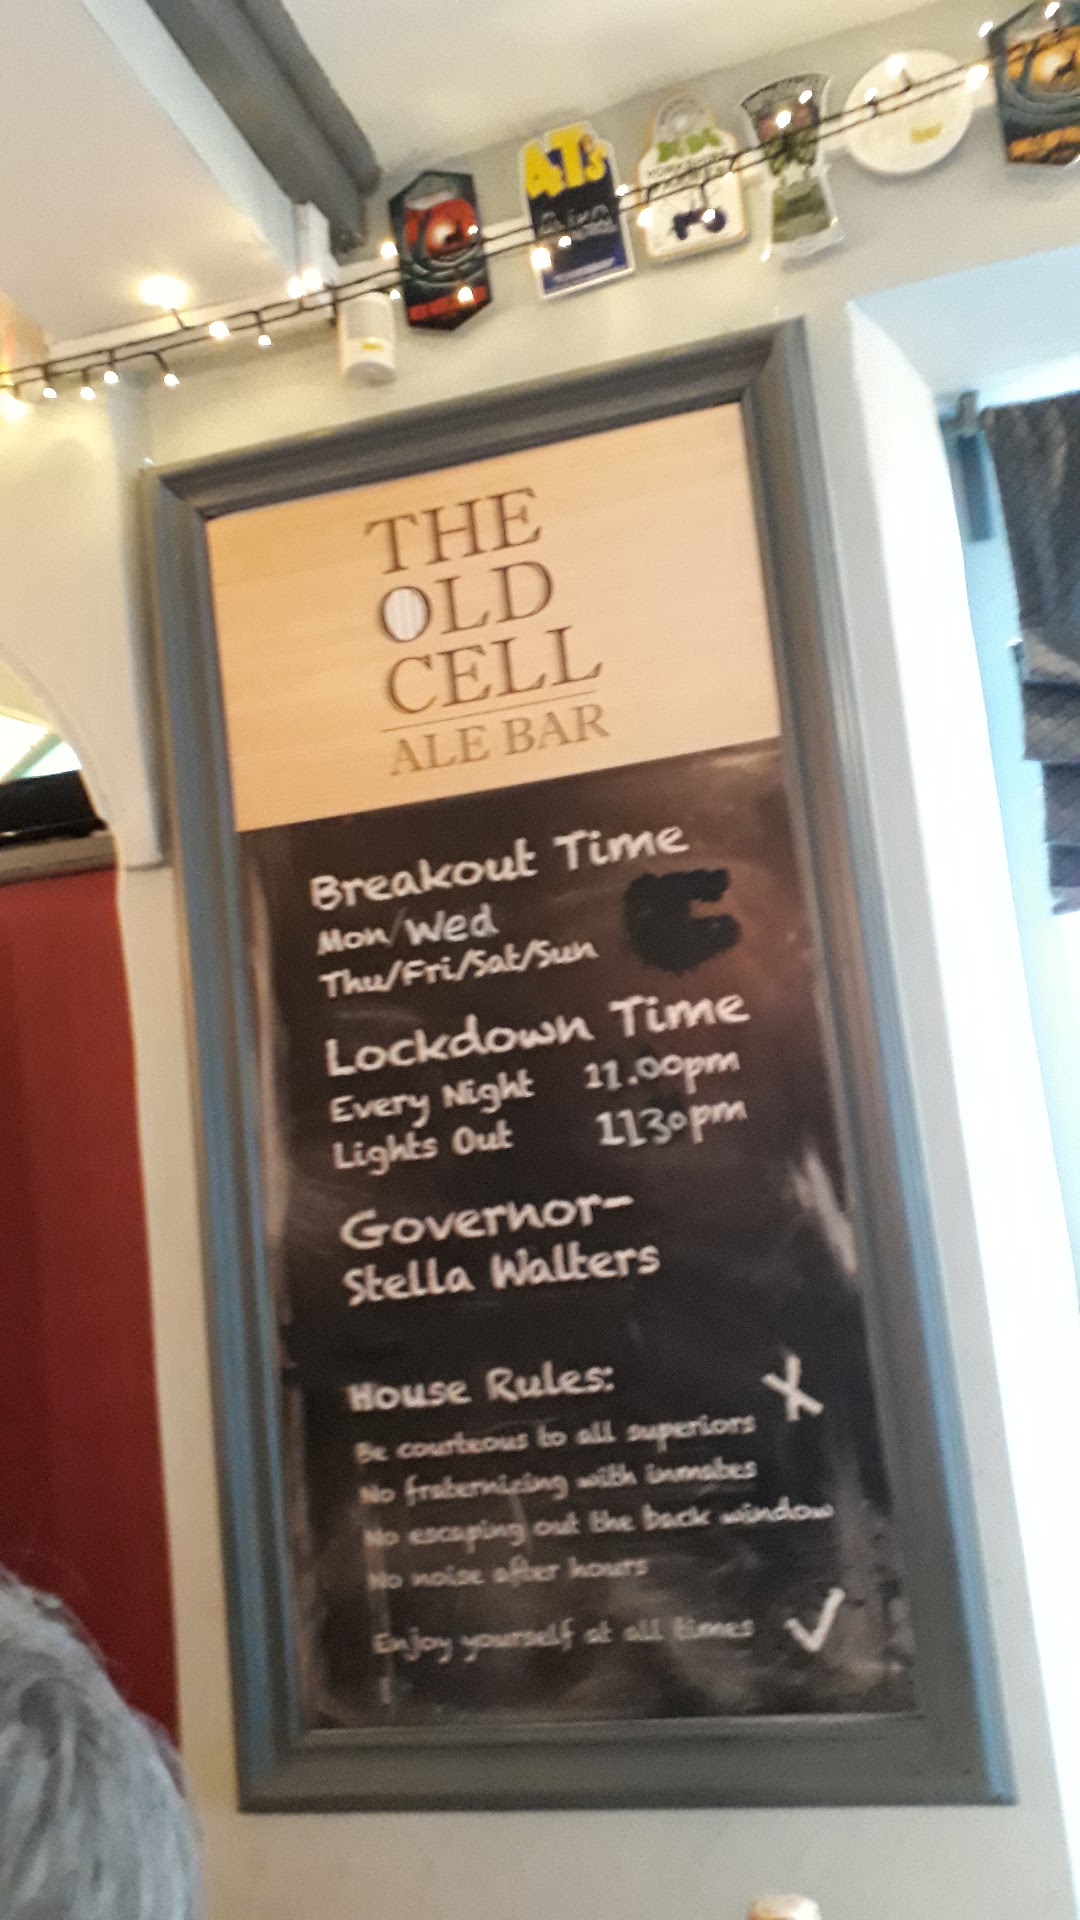 The Old Cell Ale Bar